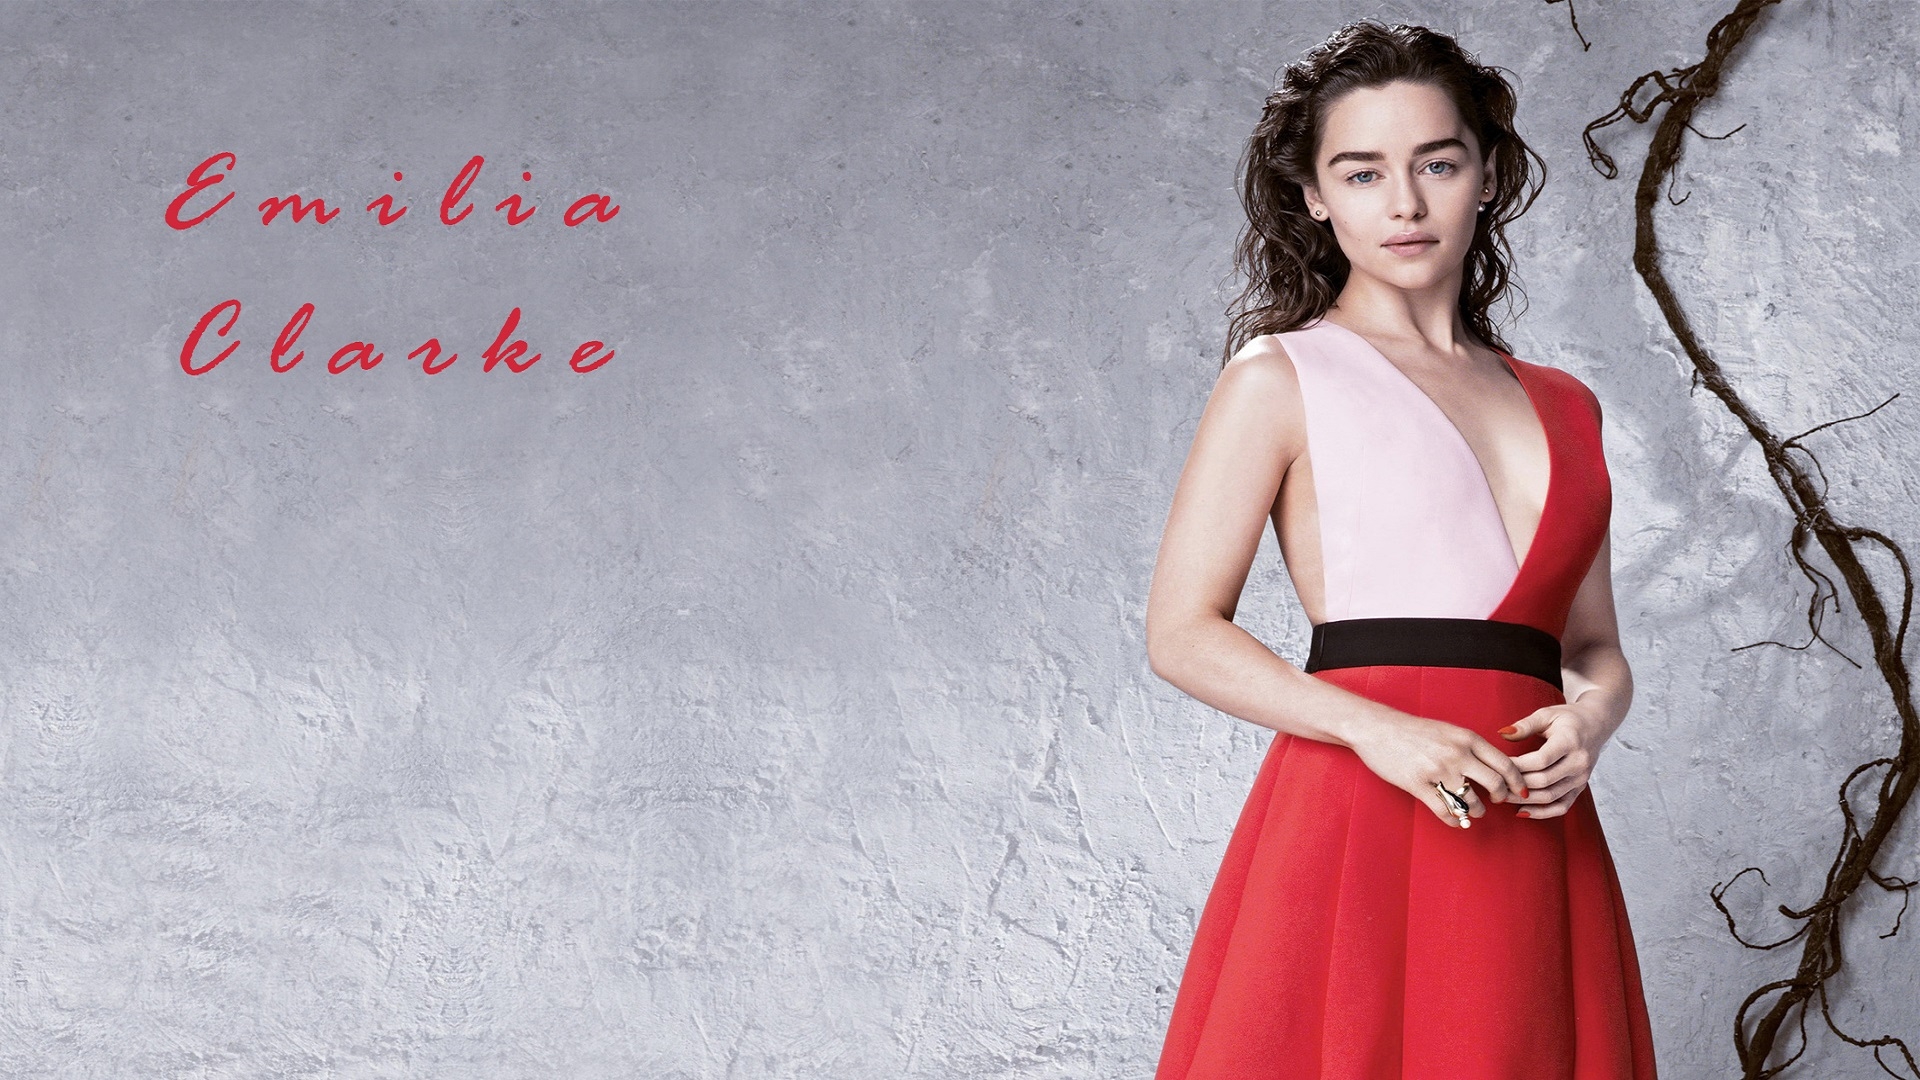 Emilia Clarke in Red for 1920 x 1080 HDTV 1080p resolution